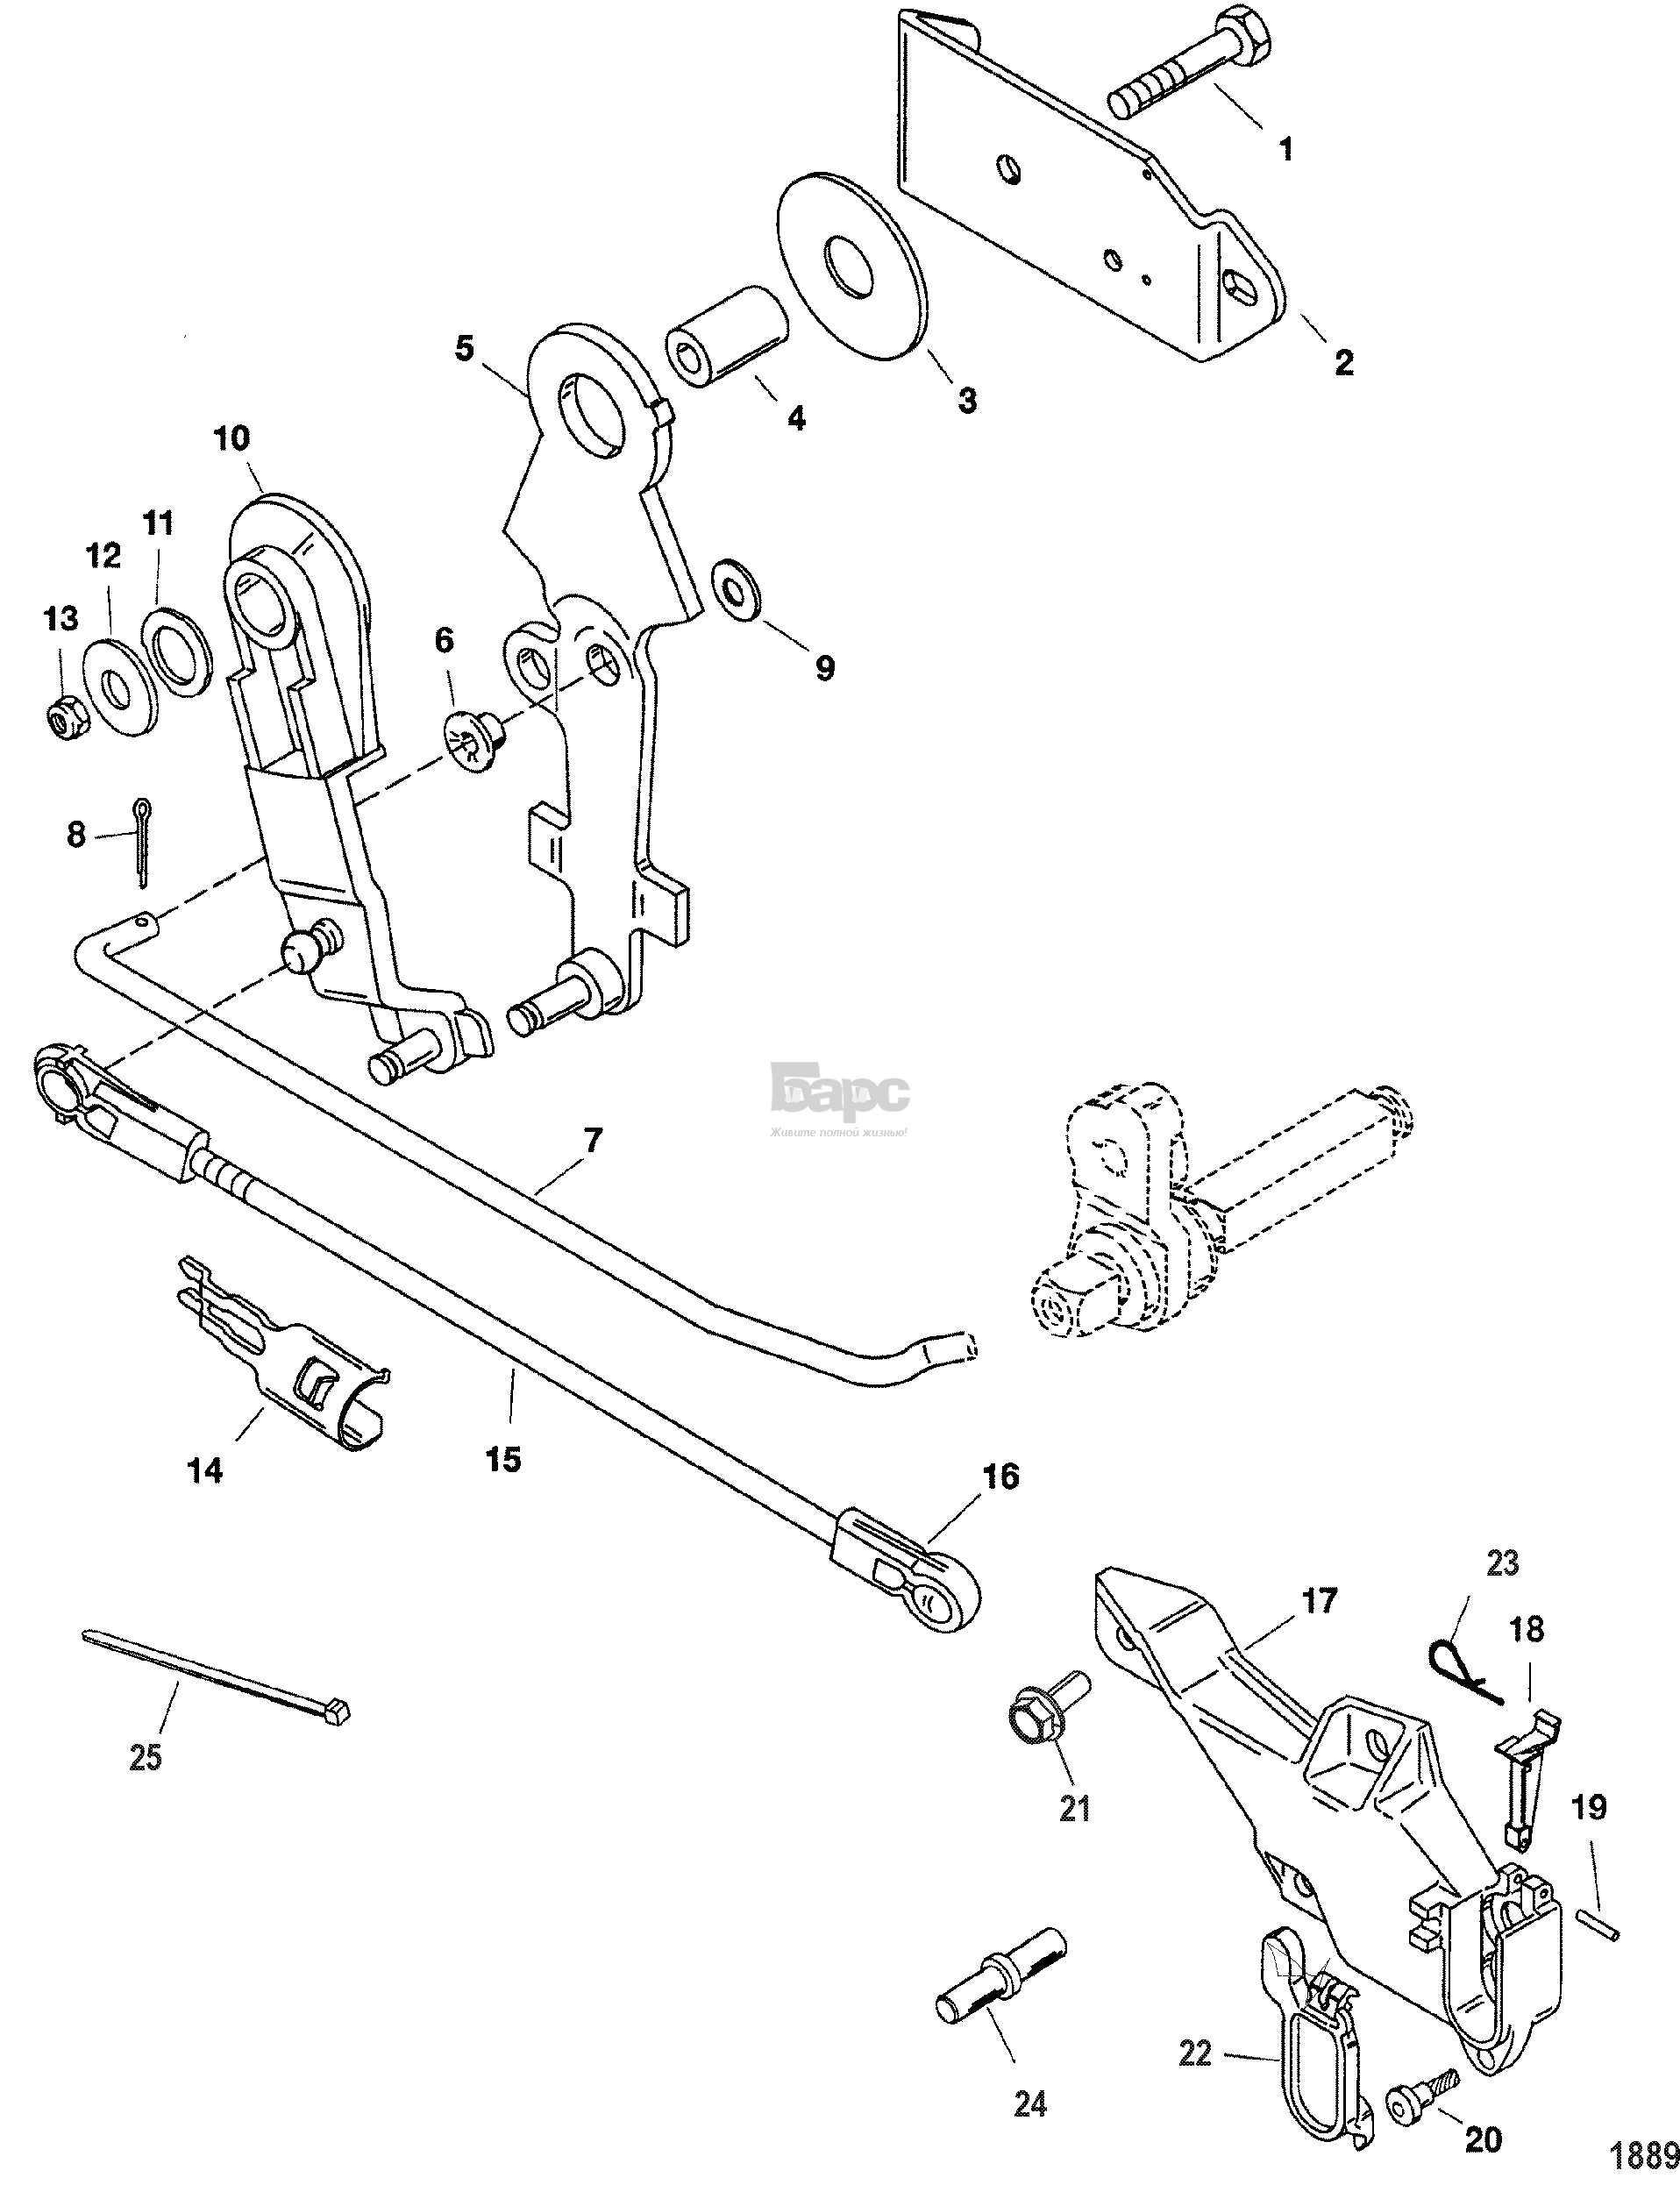 Remote Control Attaching Components